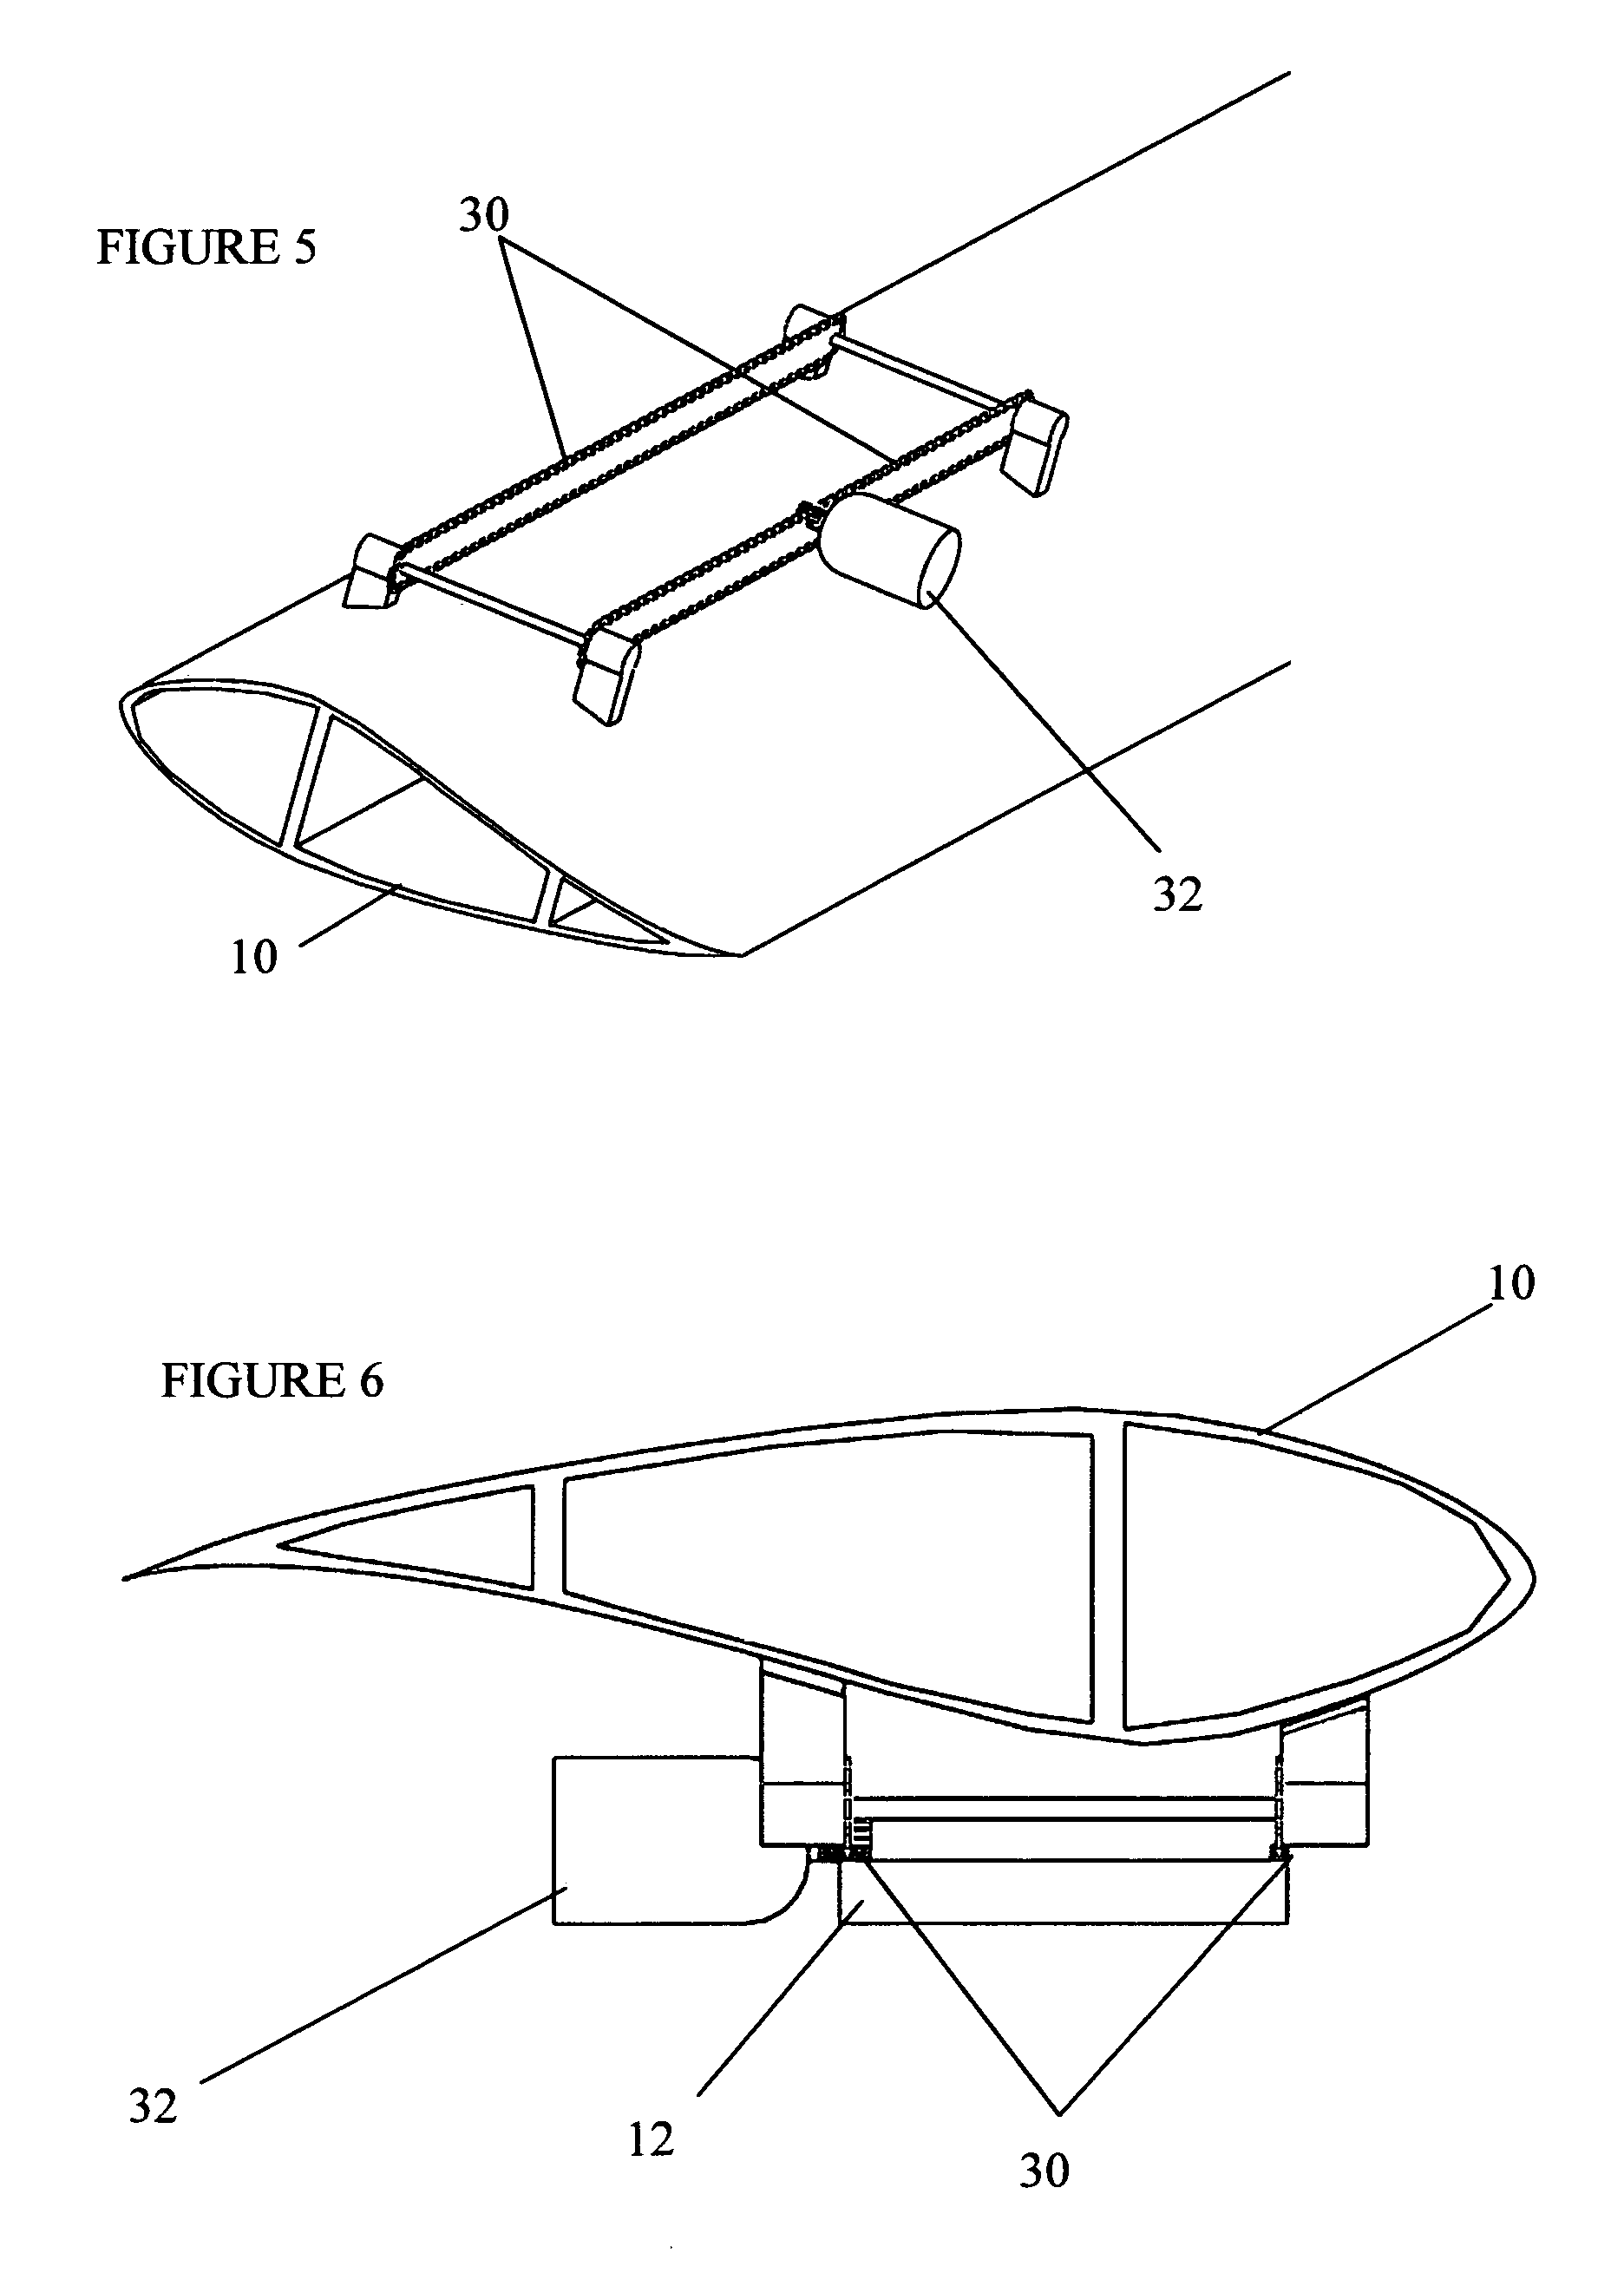 Extendable rotor blades for power generating wind and ocean current turbines within a module mounted atop a main blade